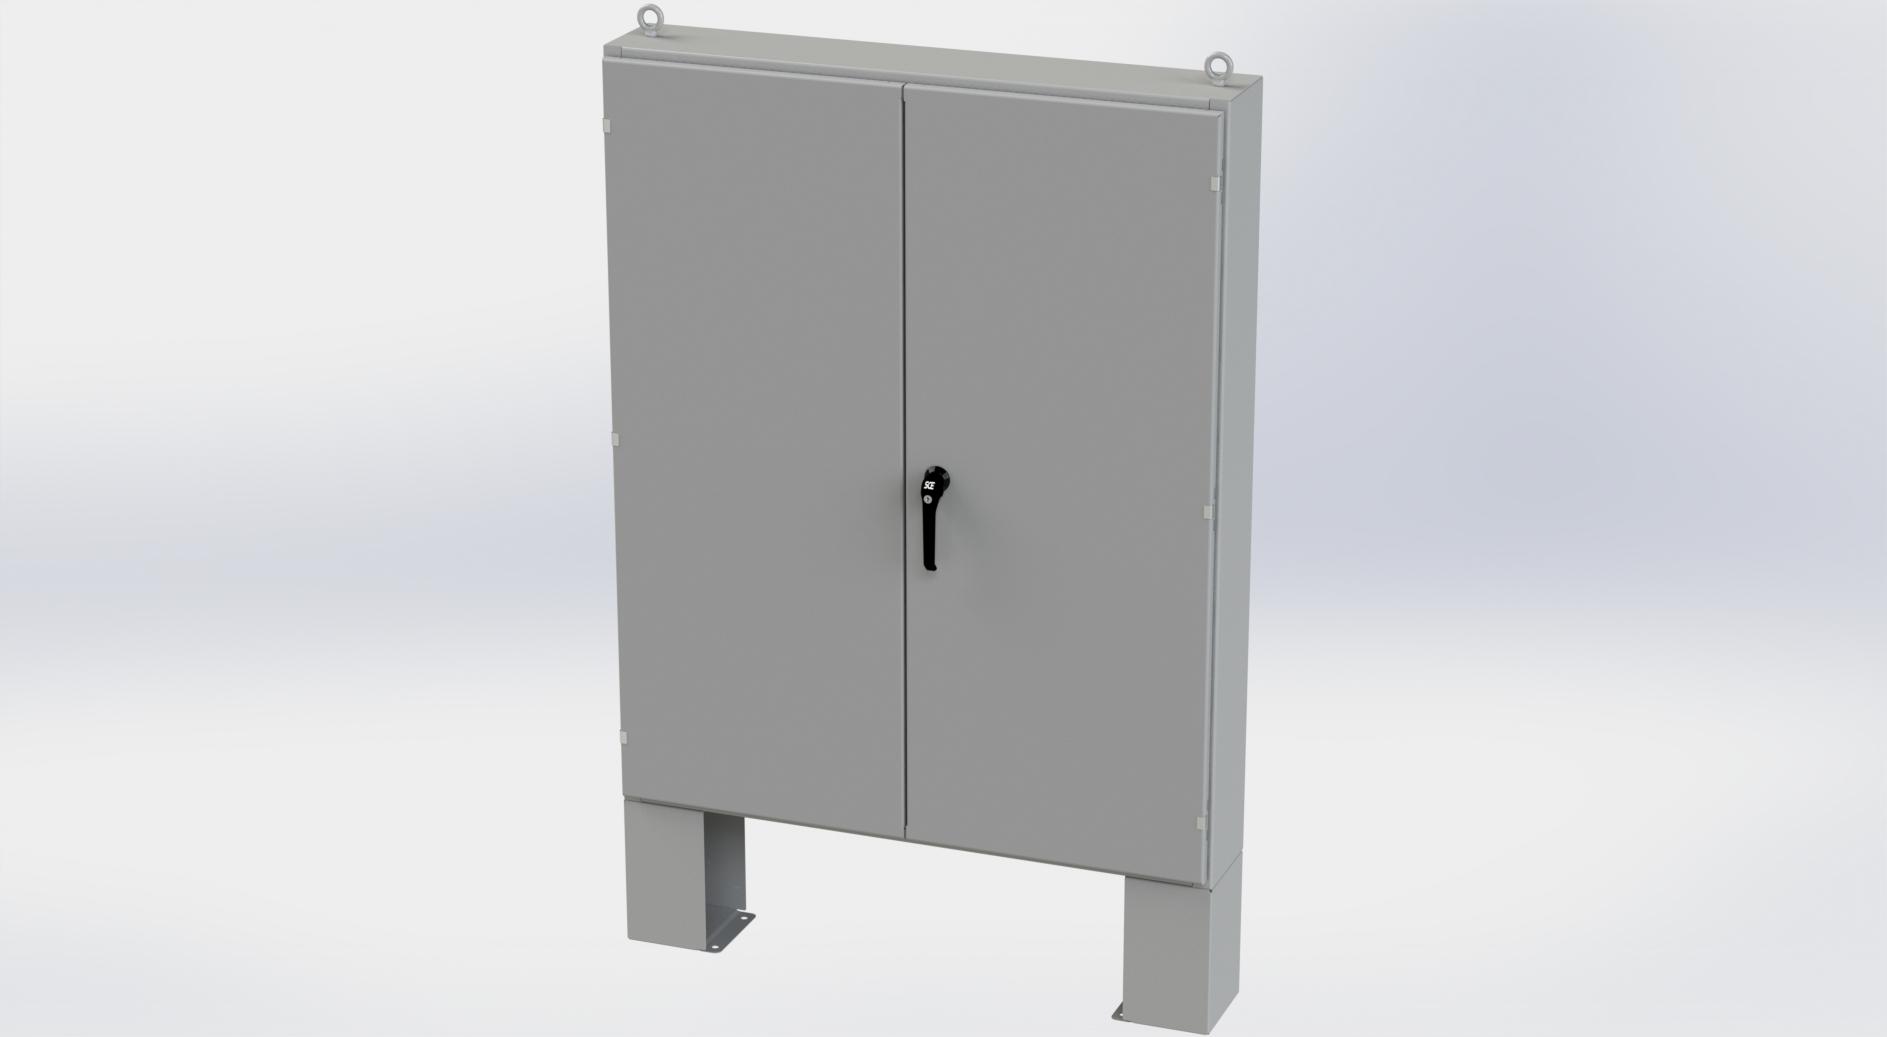 Saginaw Control SCE-604808LP 2DR LP Enclosure, Height:60.00", Width:48.00", Depth:8.00", ANSI-61 gray powder coating inside and out. Optional sub-panels are powder coated white.